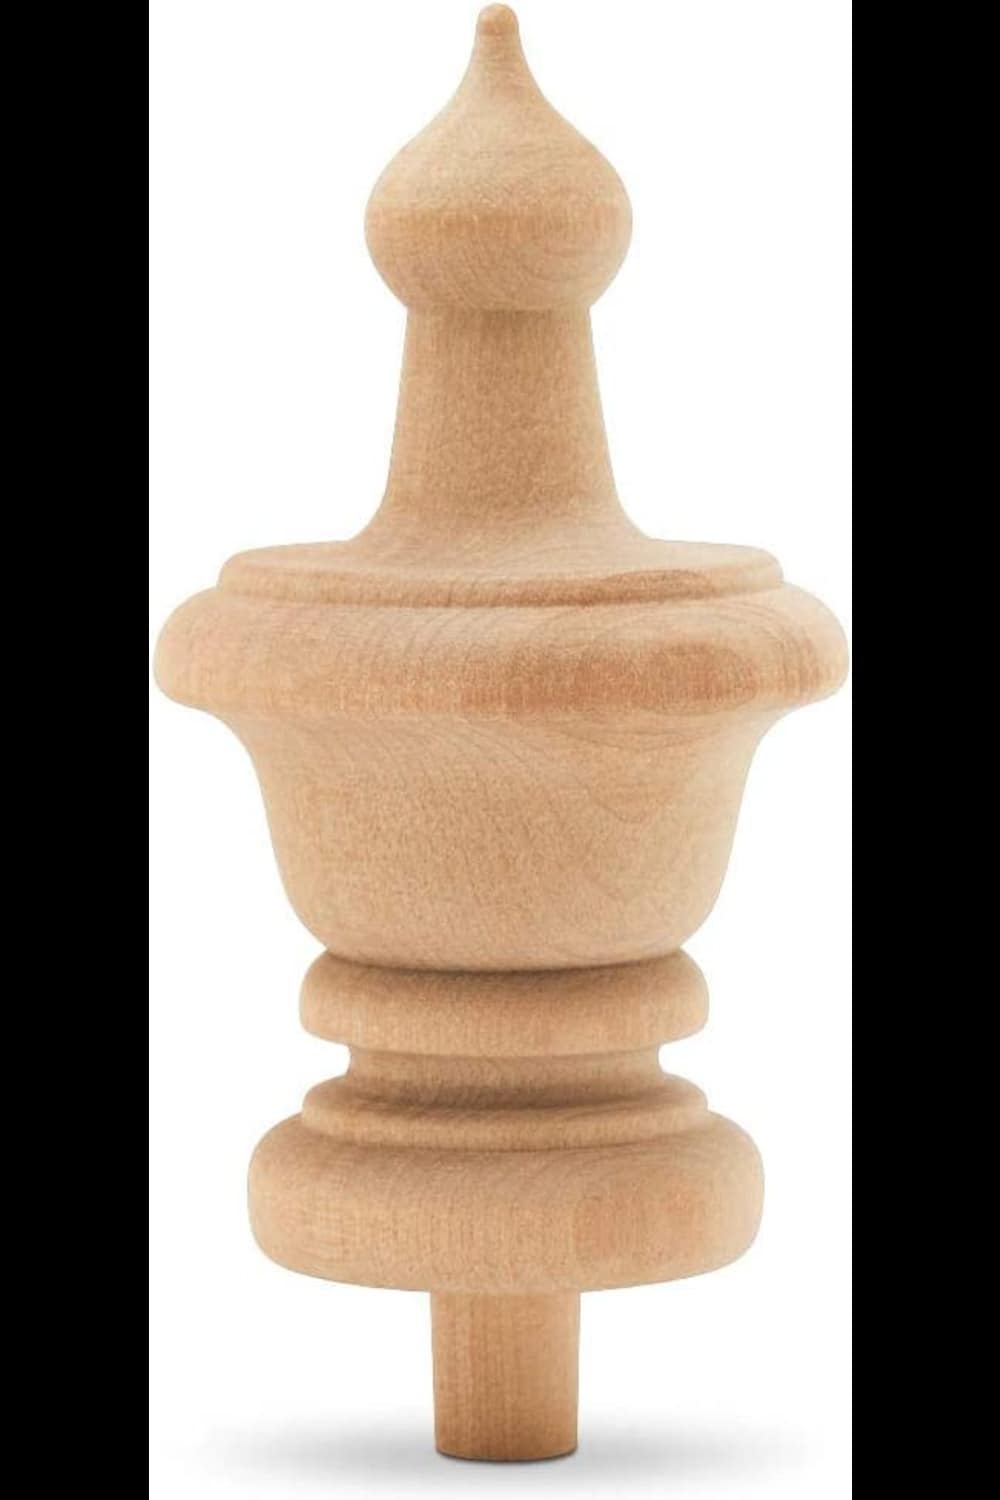 Woodpeckers Crafts Unfinished Wood Finials Decorative,4-1/4 in.- Pack of 12 Large Craft Finials in Brown | MF-FIN-414-P12